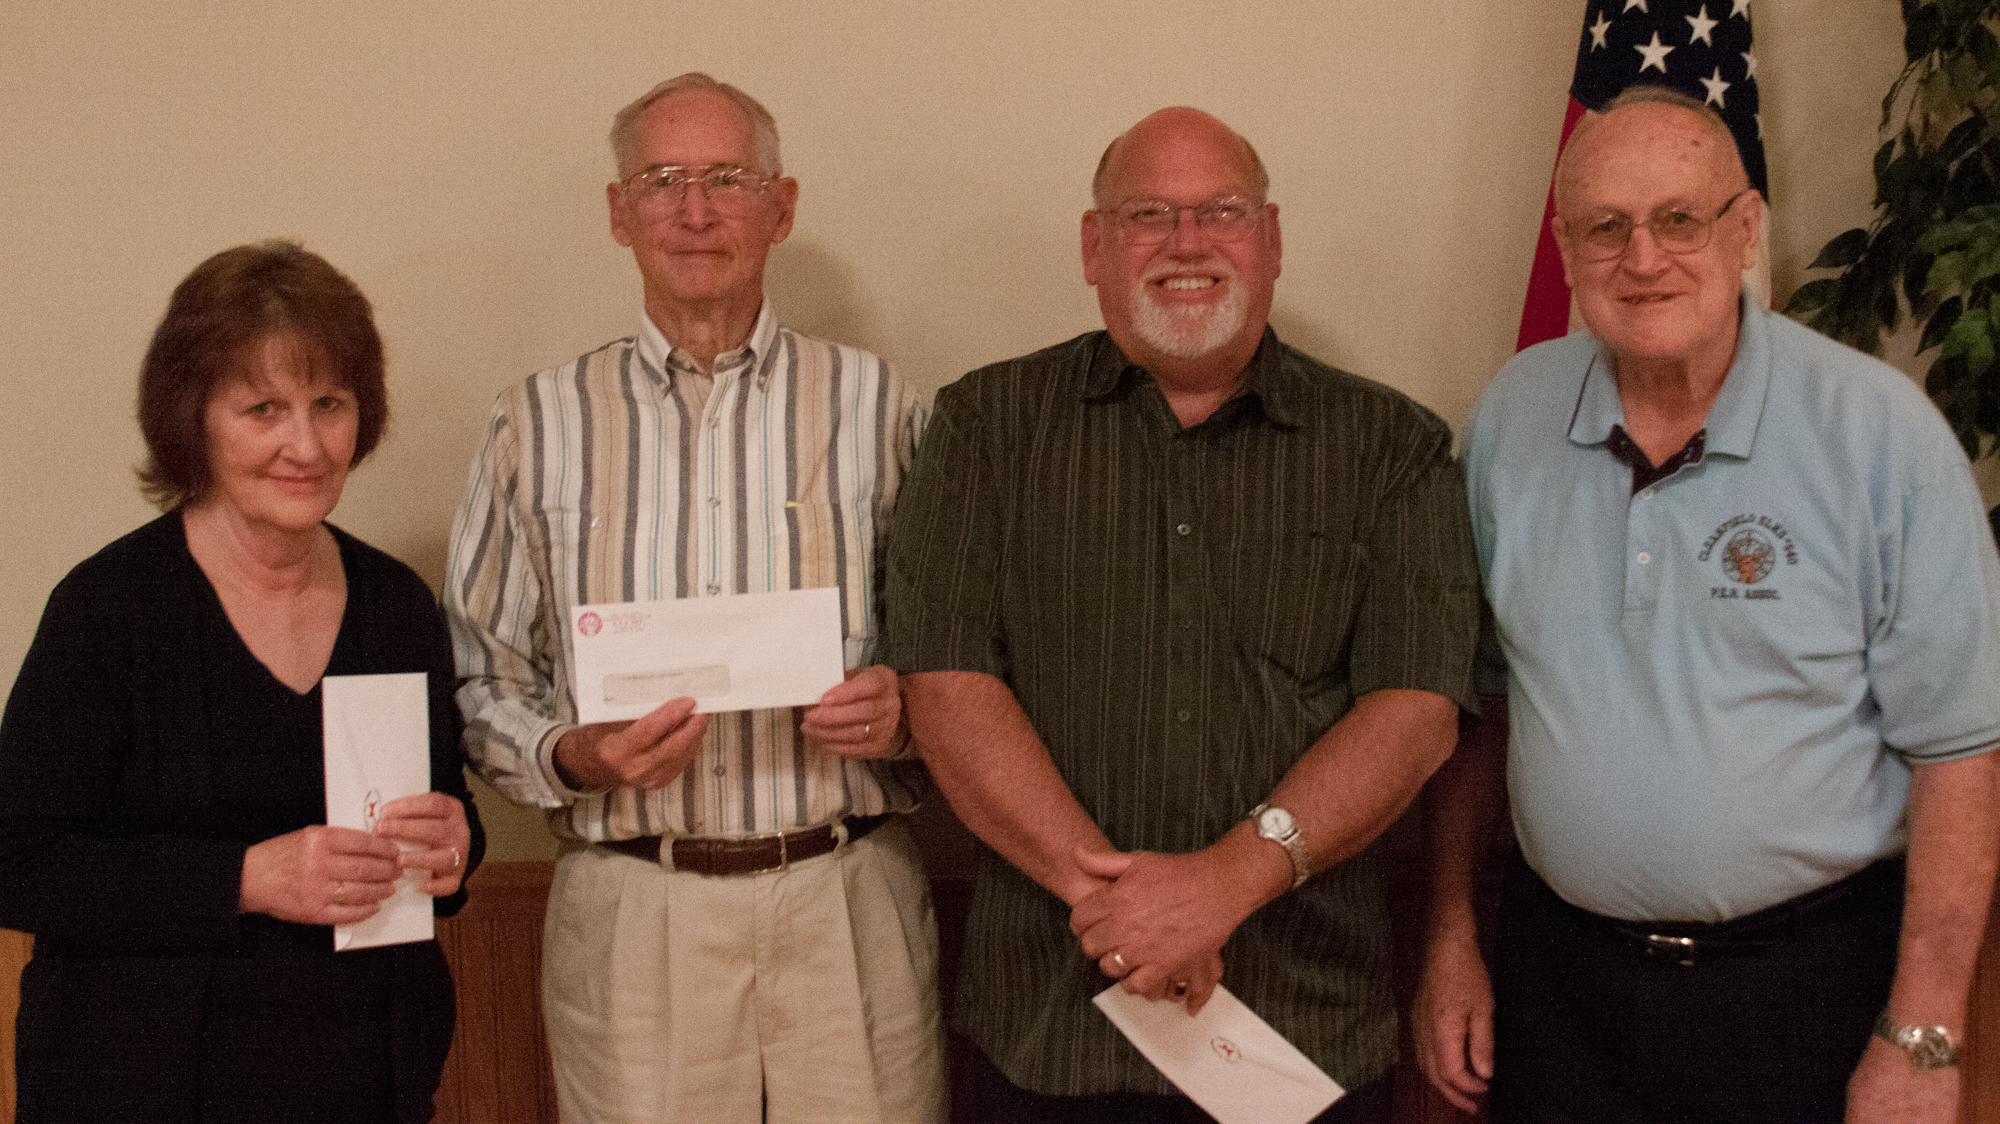 Pictured are organization representatives that received donations. From left to right, the reps are from CAST, Curwensville Civic Center, Clearfield EMS and Elks member Duane Berry, who presented this set of envelopes.